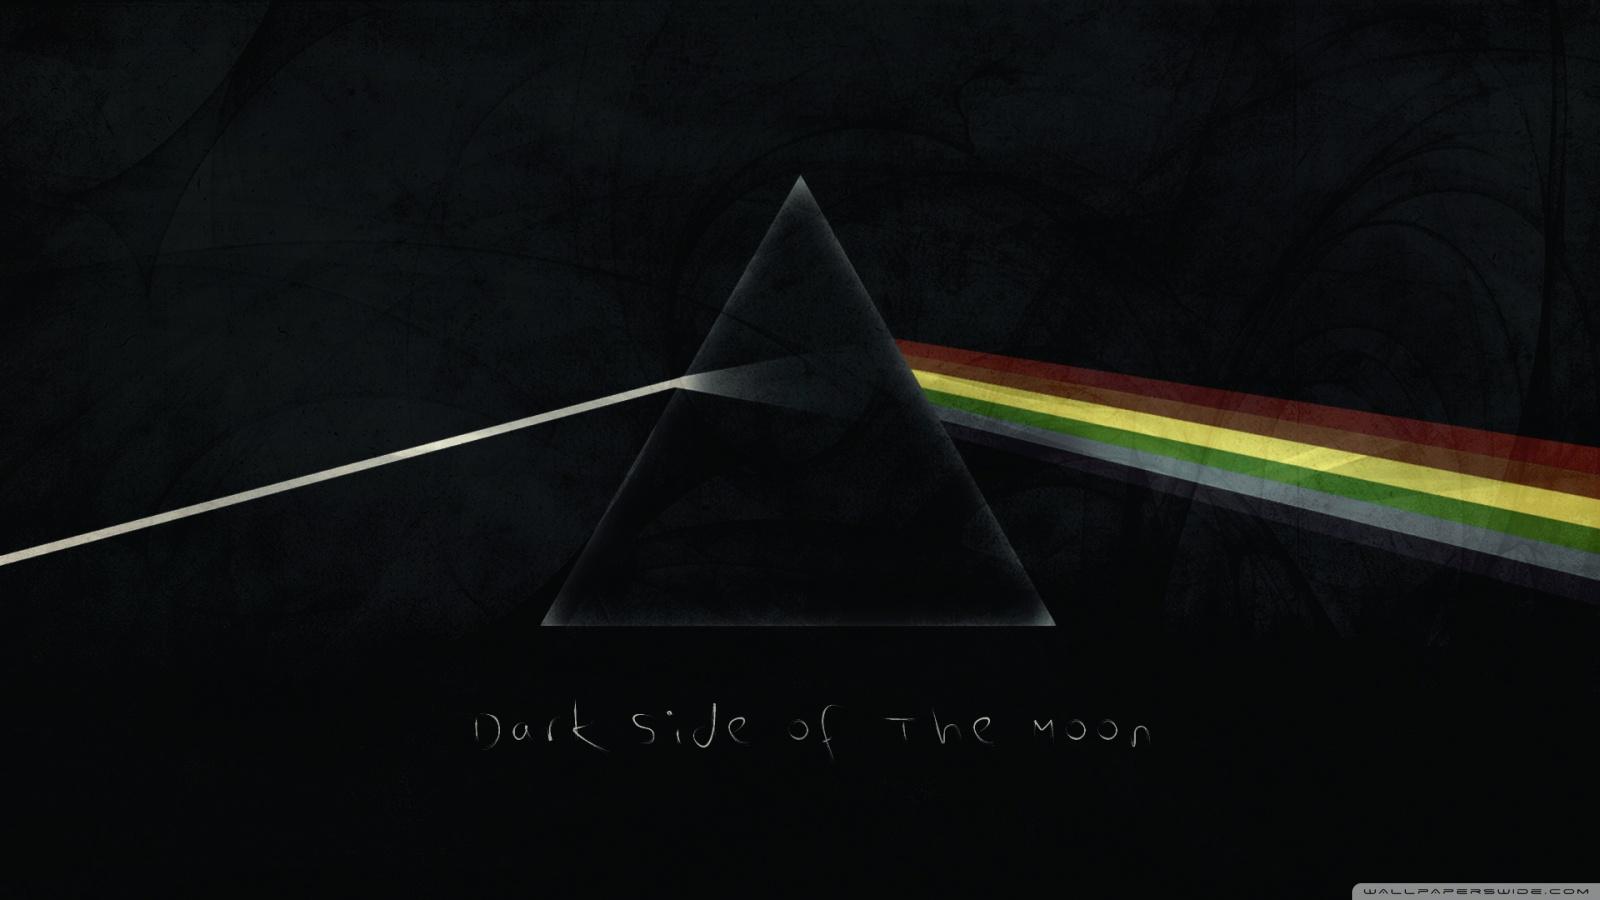 The Dark Side Of The Moon HD Wallpaper